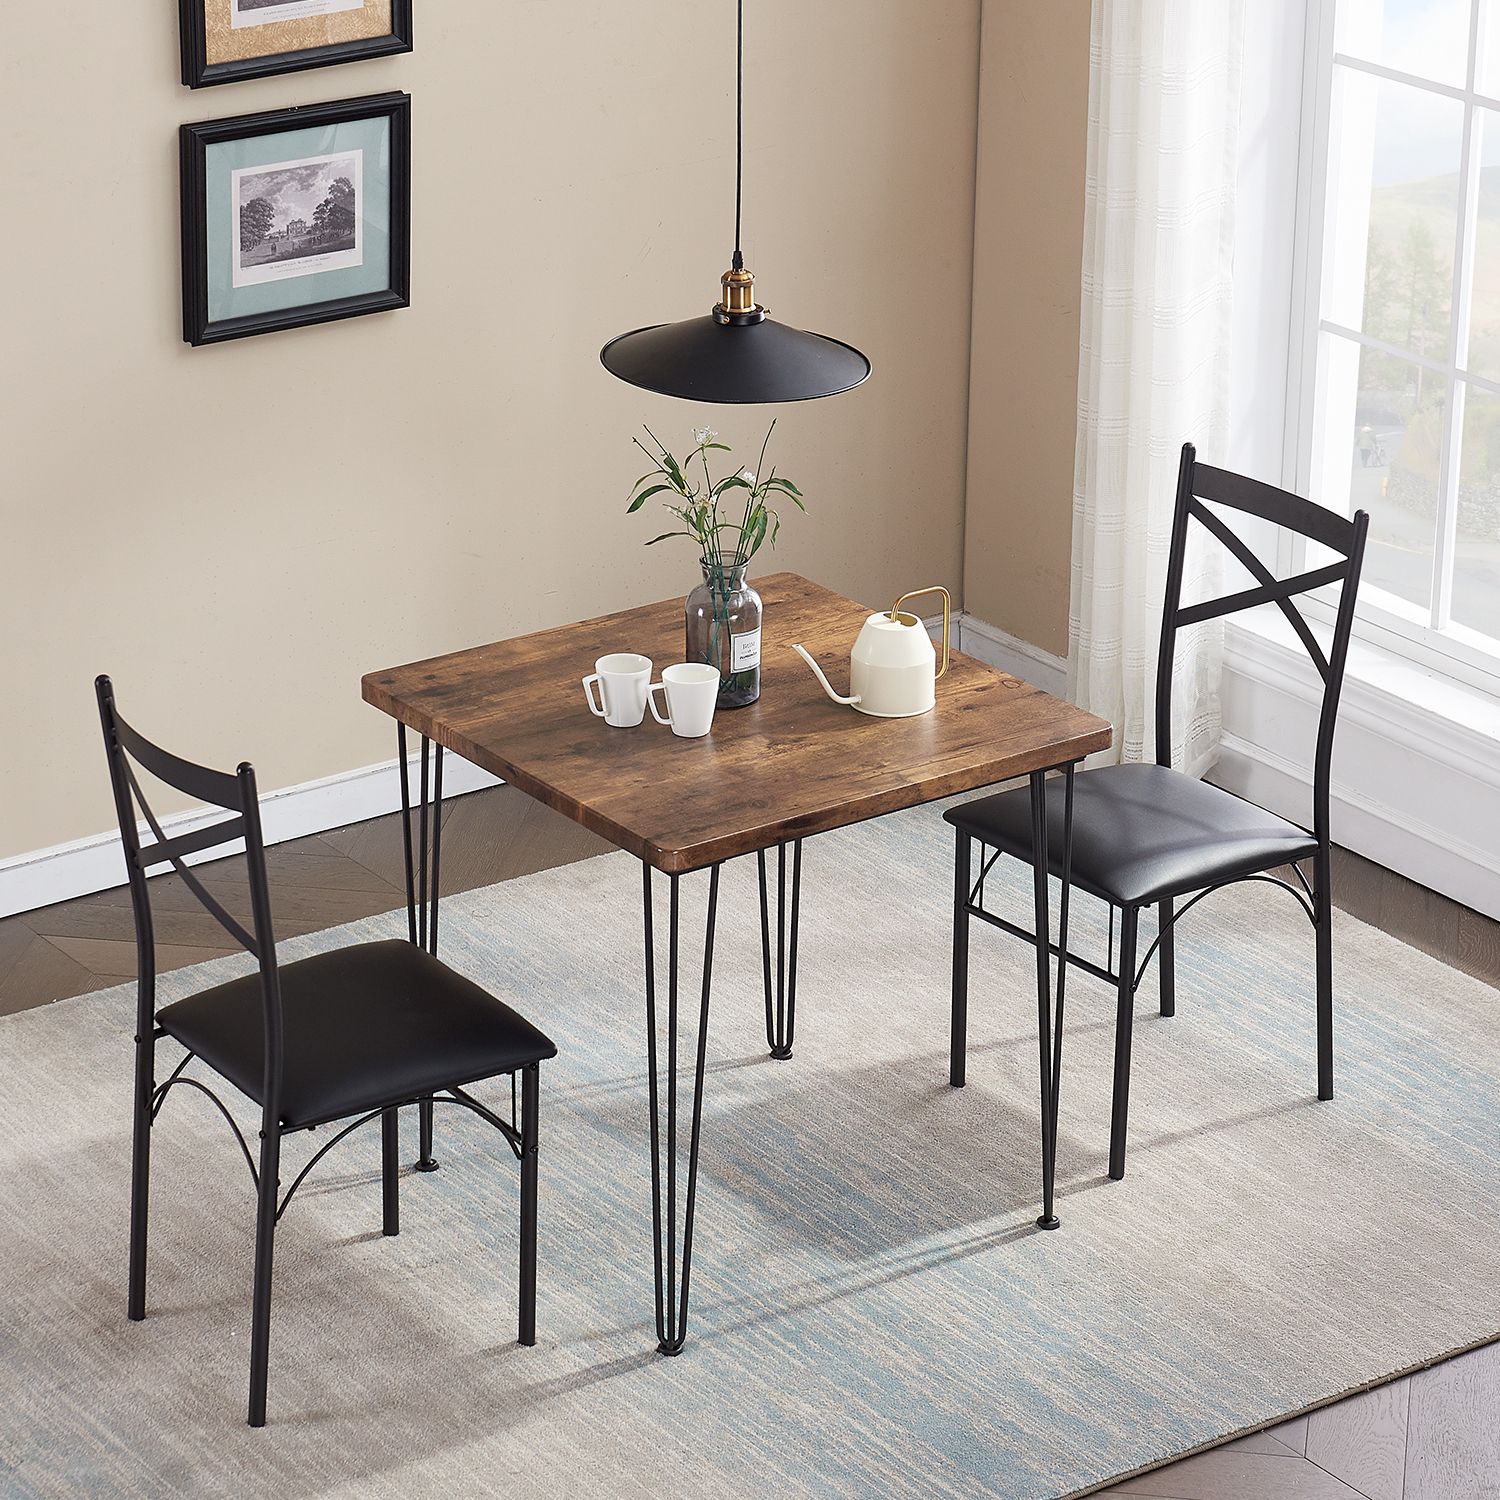 Brown Dining Tables Within Favorite 3 Piece Dining Table Set Dining Room Table With Chairs (View 4 of 20)